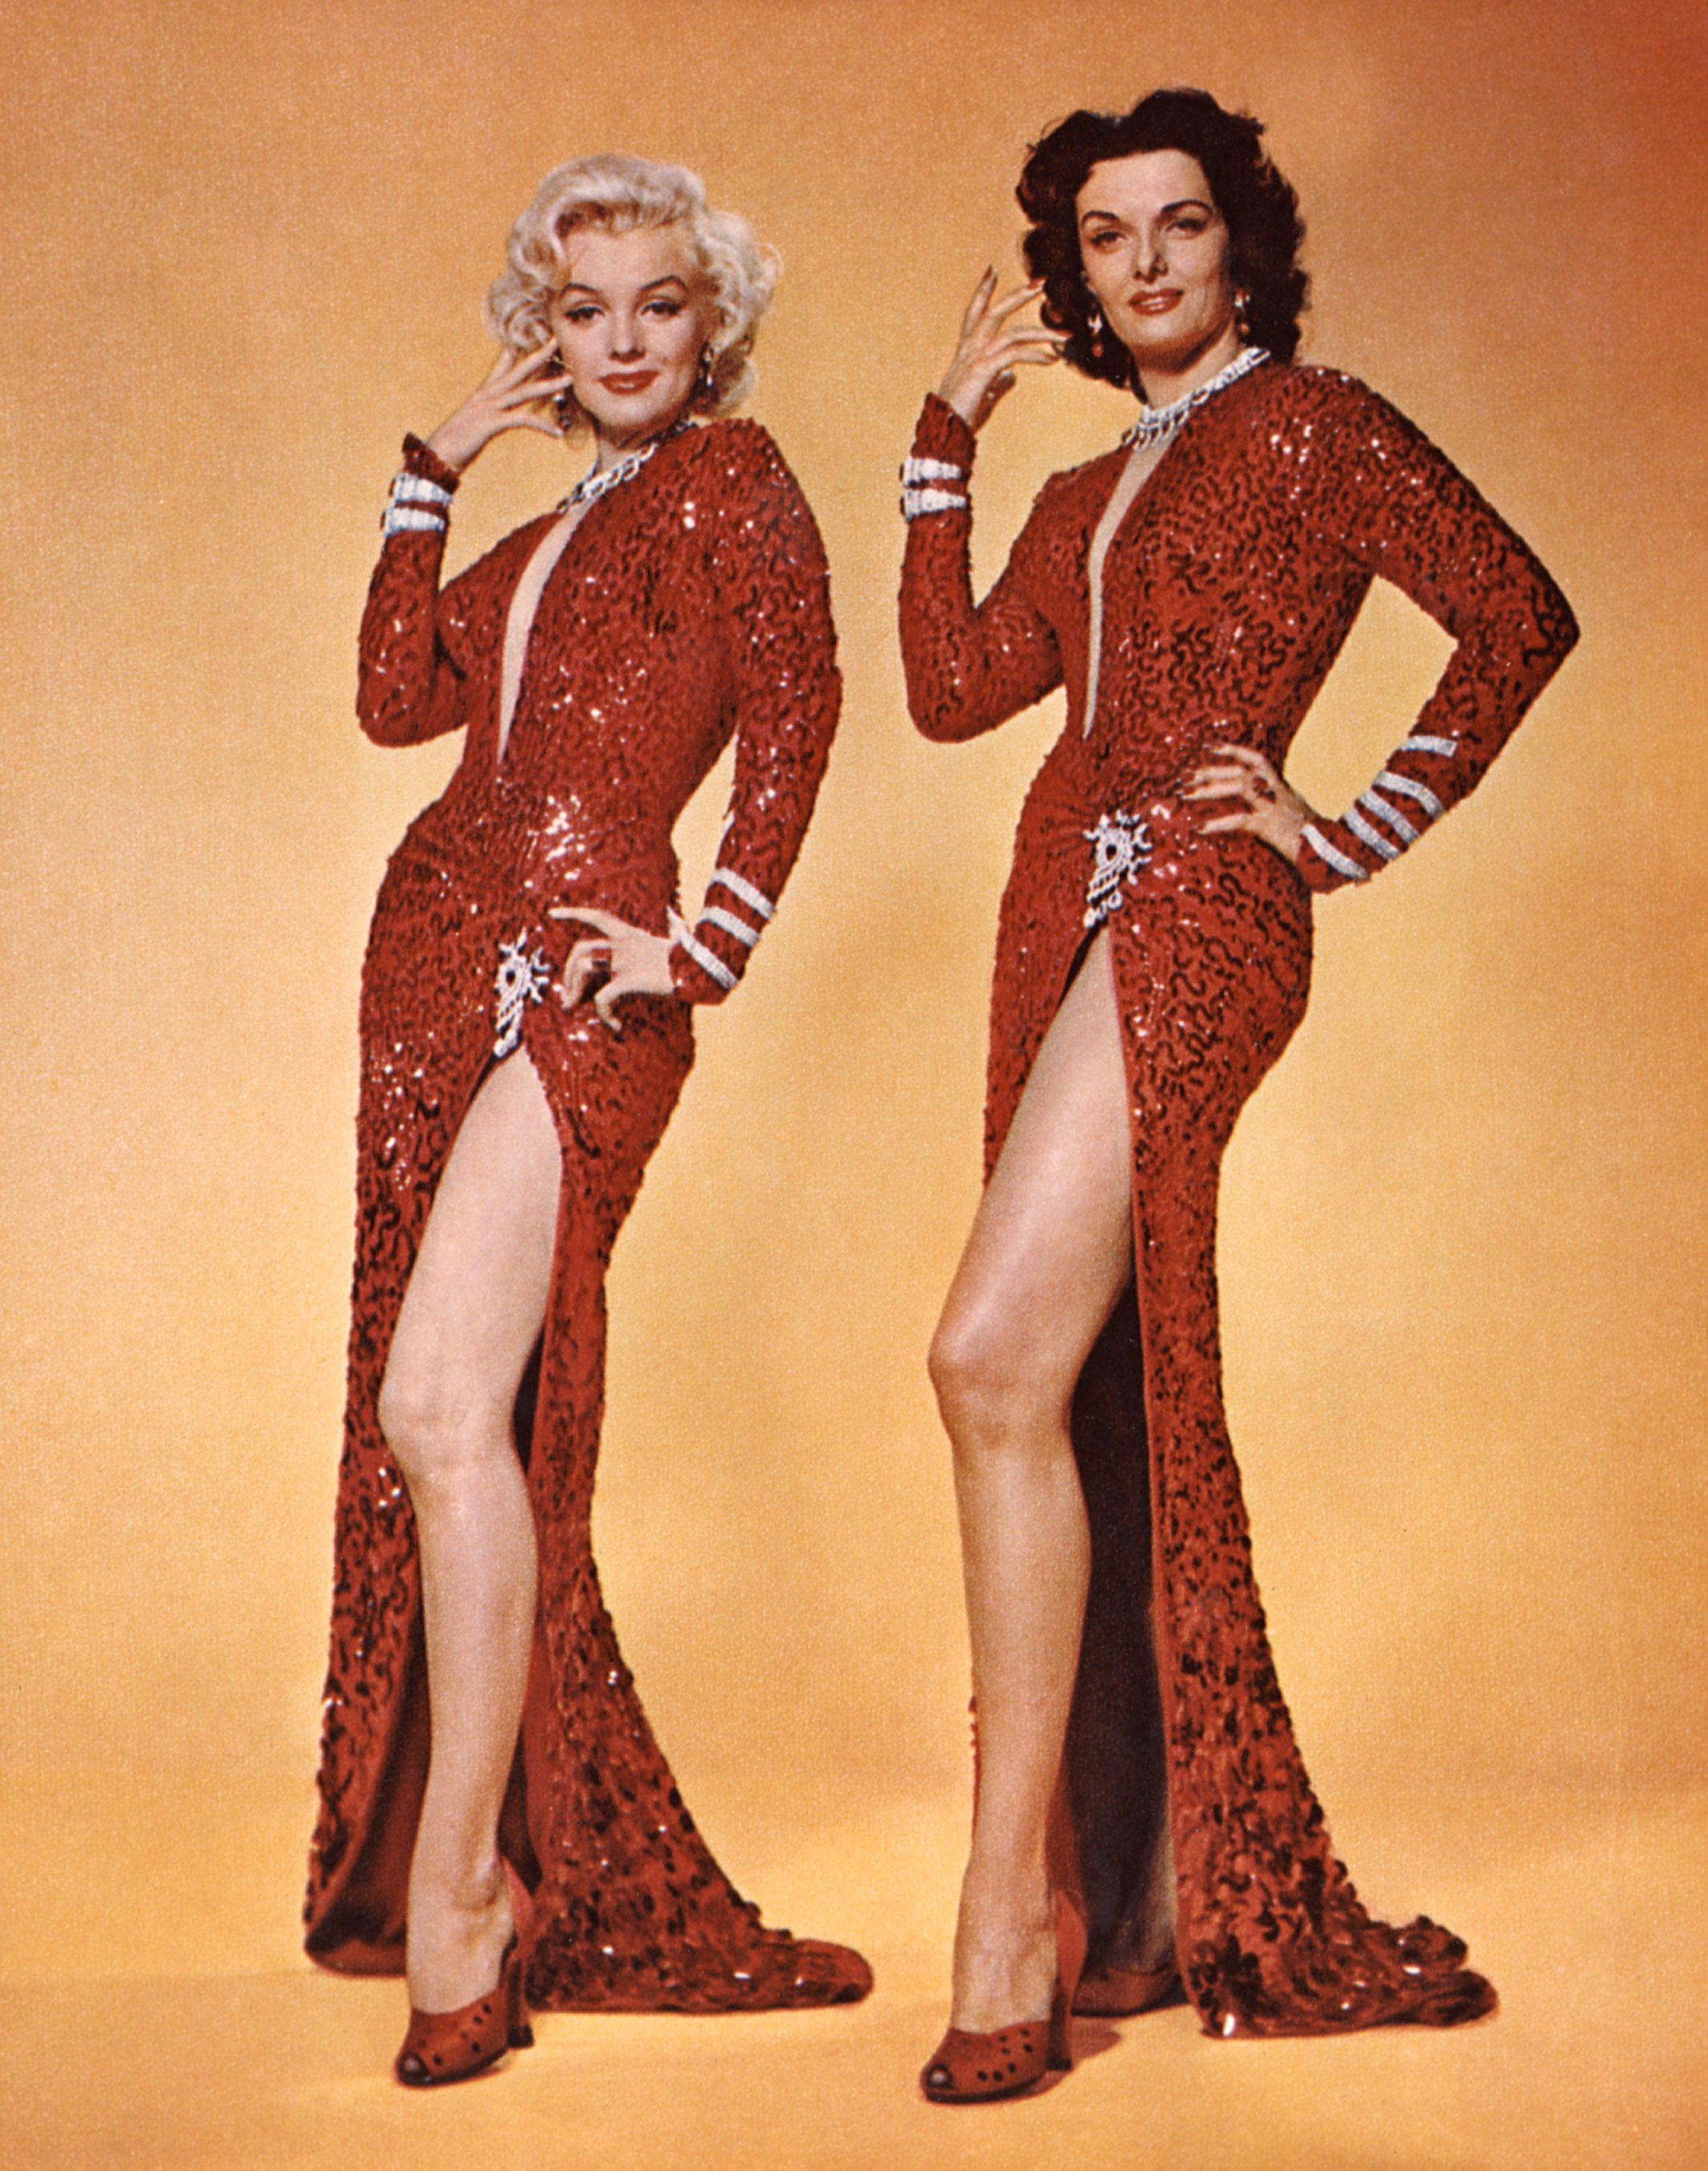 Two women pose in red dresses